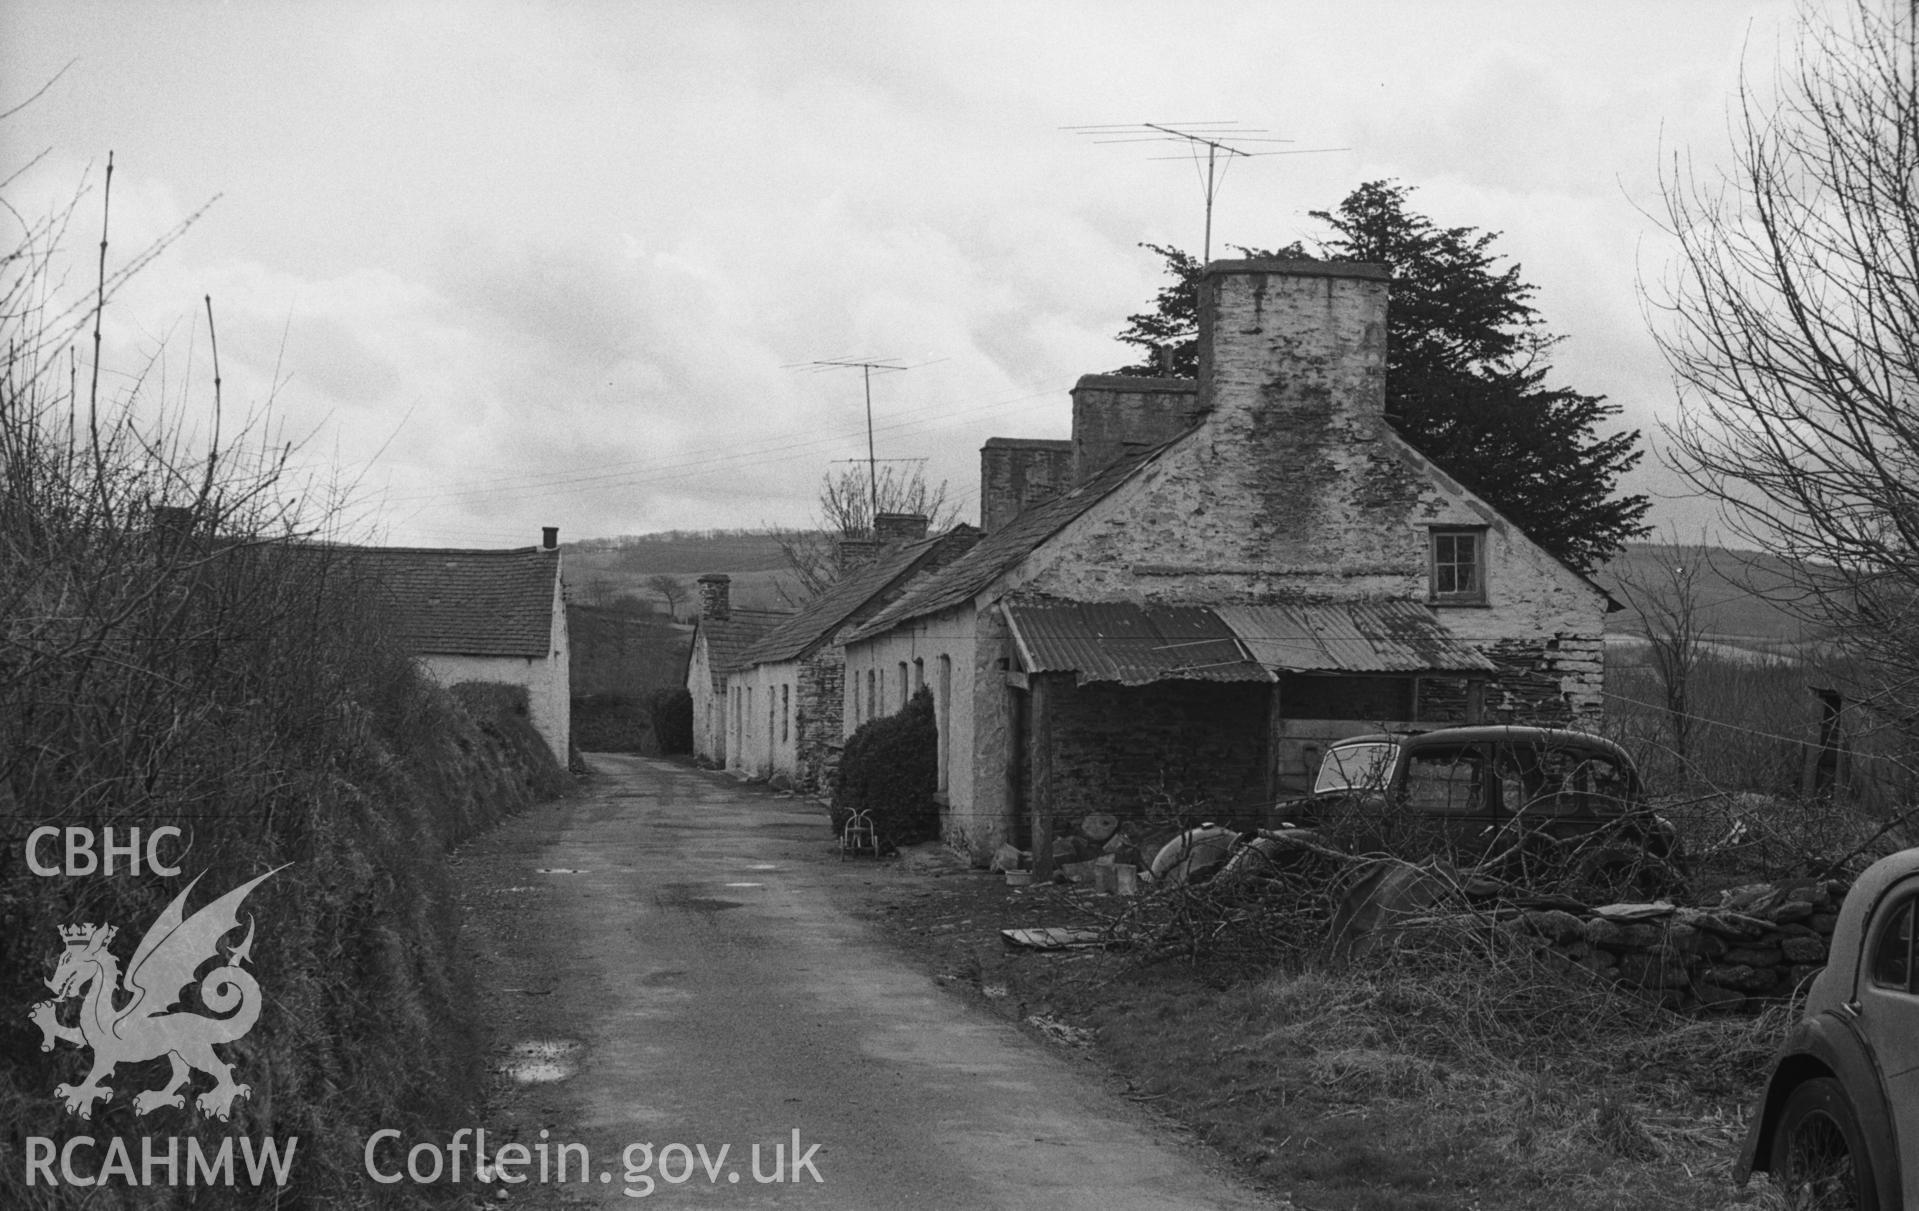 Digital copy of a black and white negative showing old cottages of Dre-Fach, Llanwnnen, 300m south east of the church. Photographed in April 1963 by Arthur O. Chater from Grid Reference SN 5357 4708, looking south east.